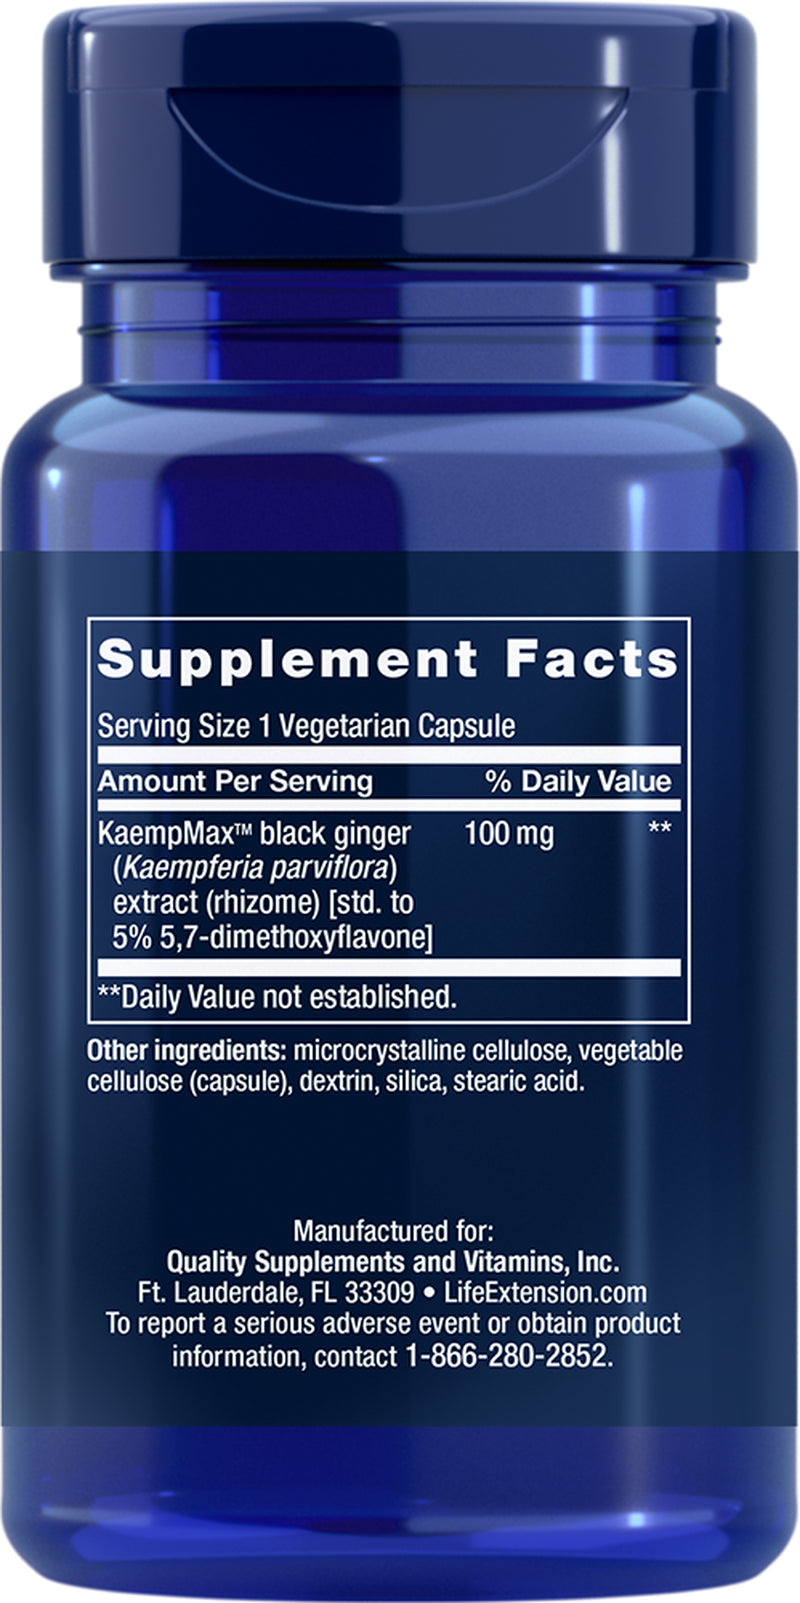 Life Extension Male Vascular Sexual Support for Men 30 Capsules